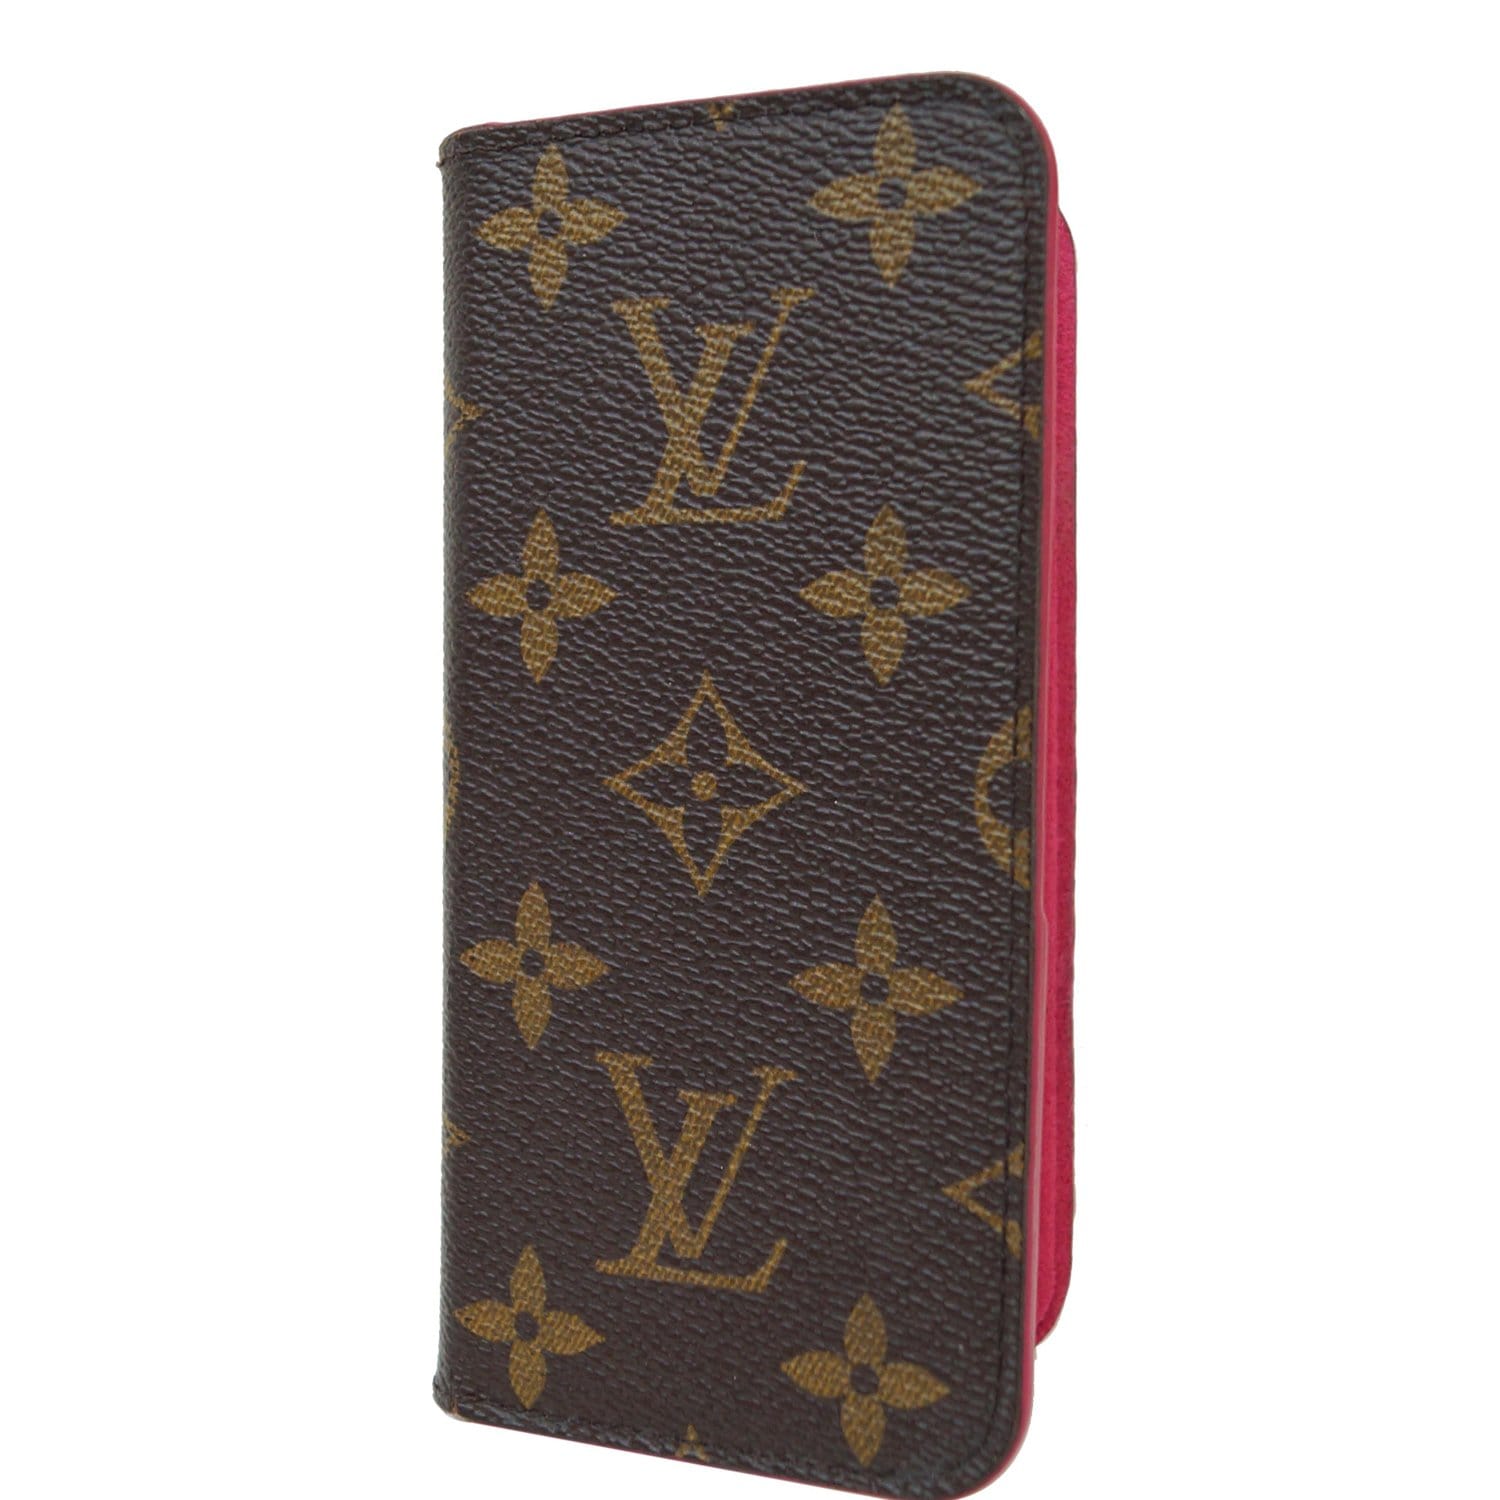 Auth Louis Vuitton LV iPhone X/XS Case Epi Leather Red Used Accessories  Spain